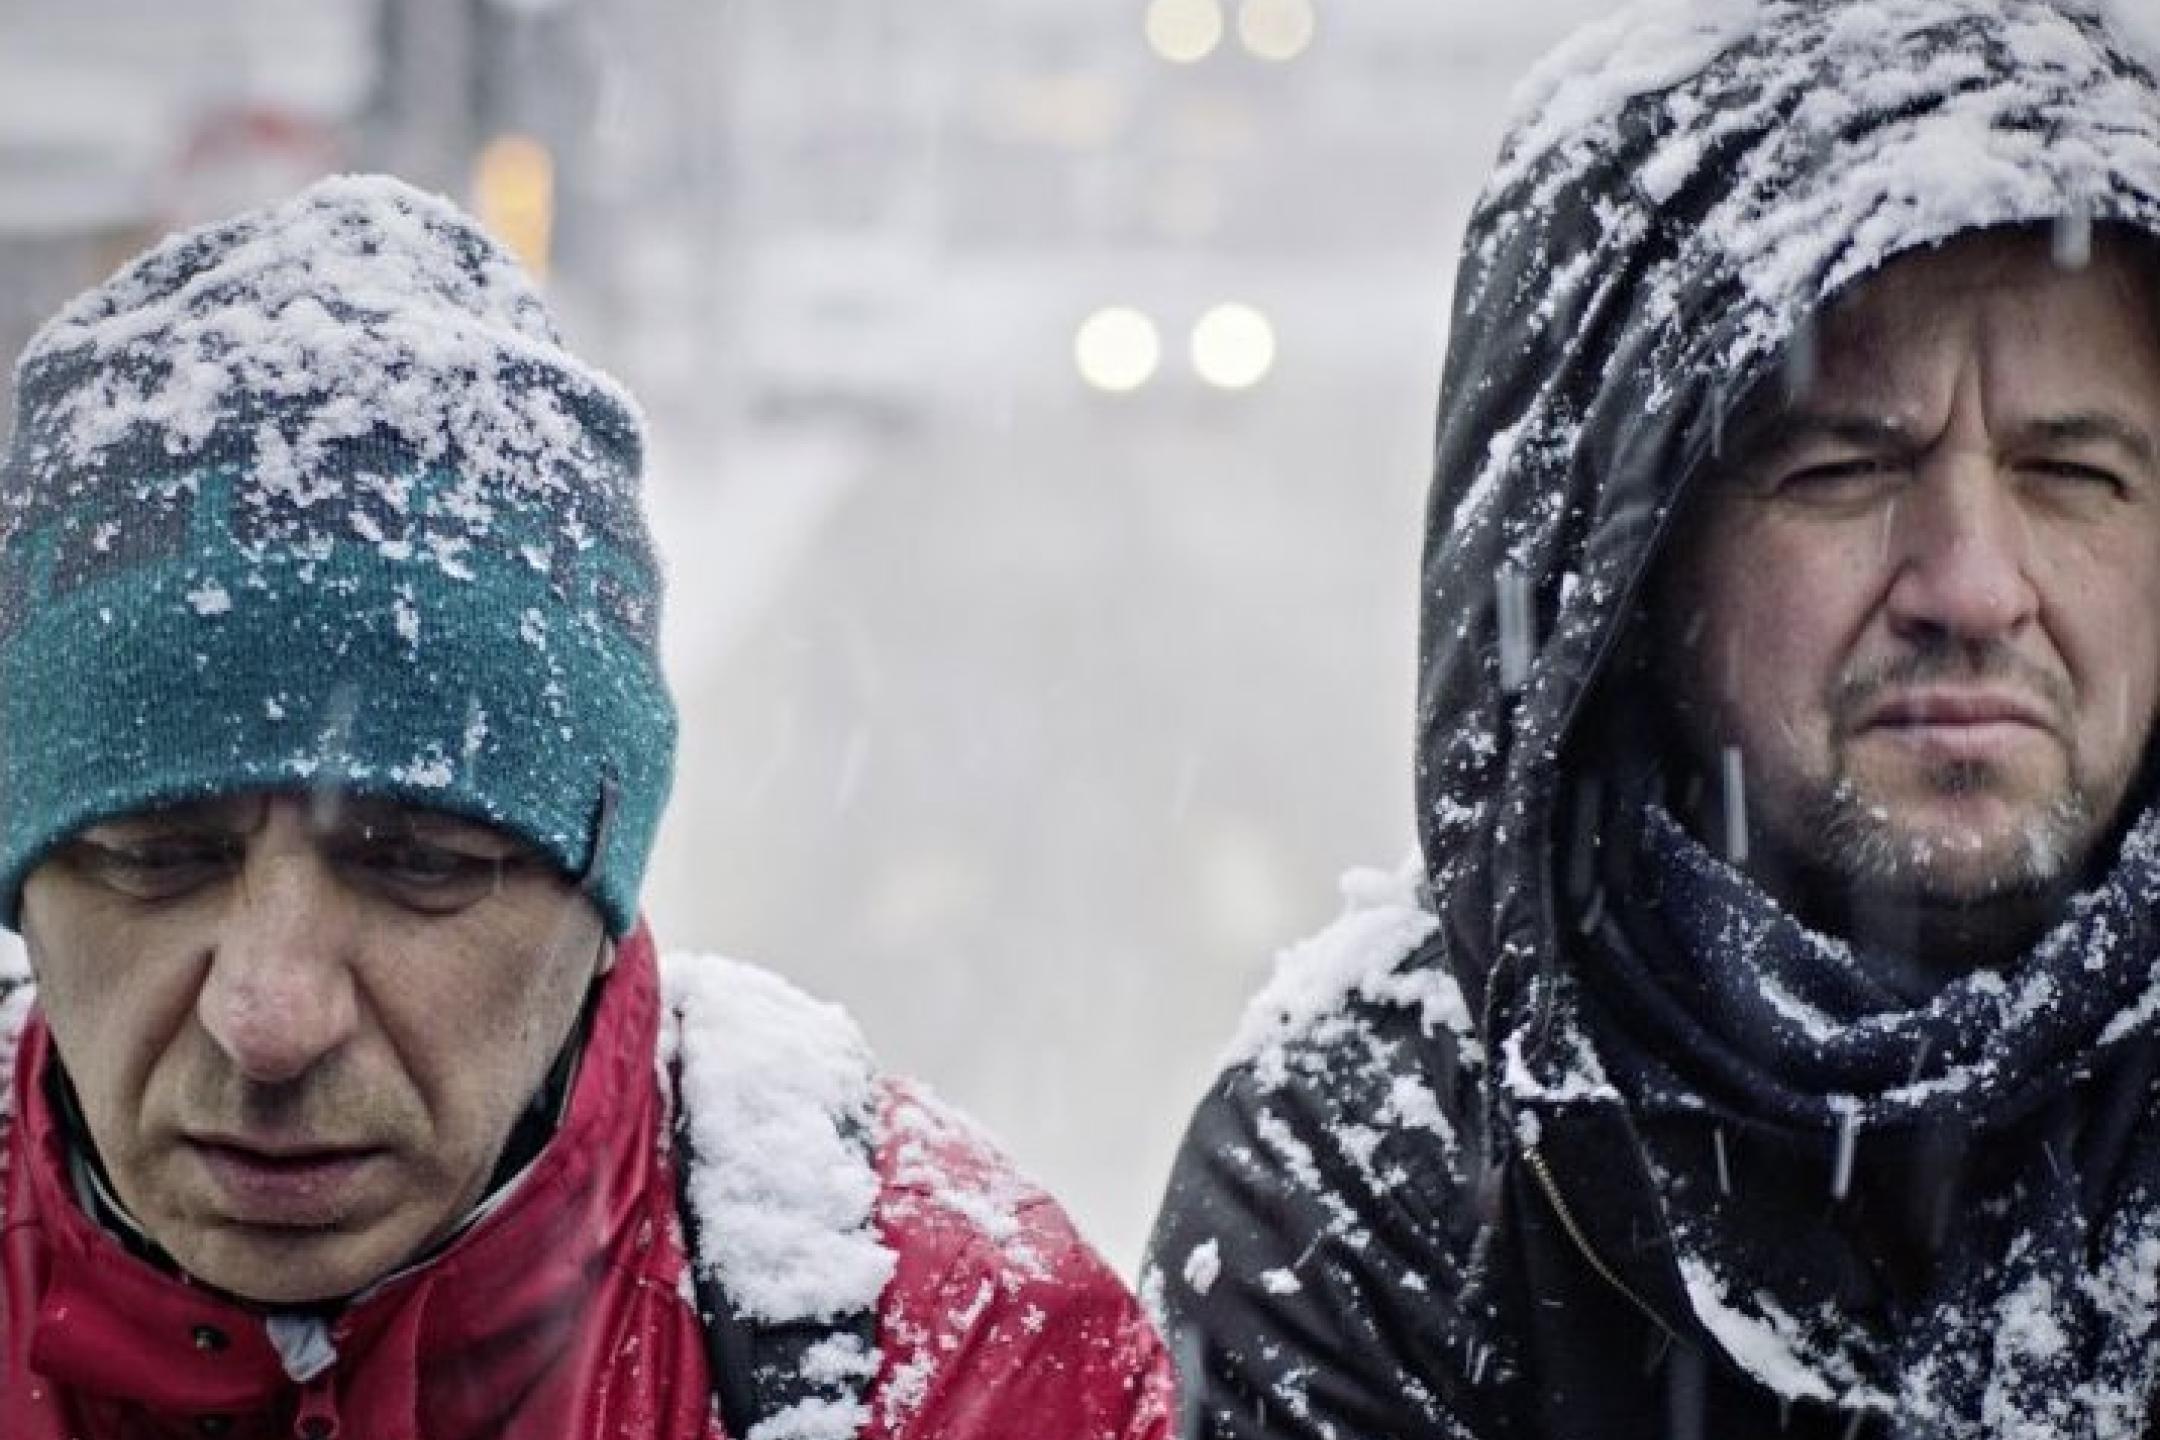 Two grim-looking men who are wearing winter jackets covered with snow are walking side by side in a street that is also covered with snow.